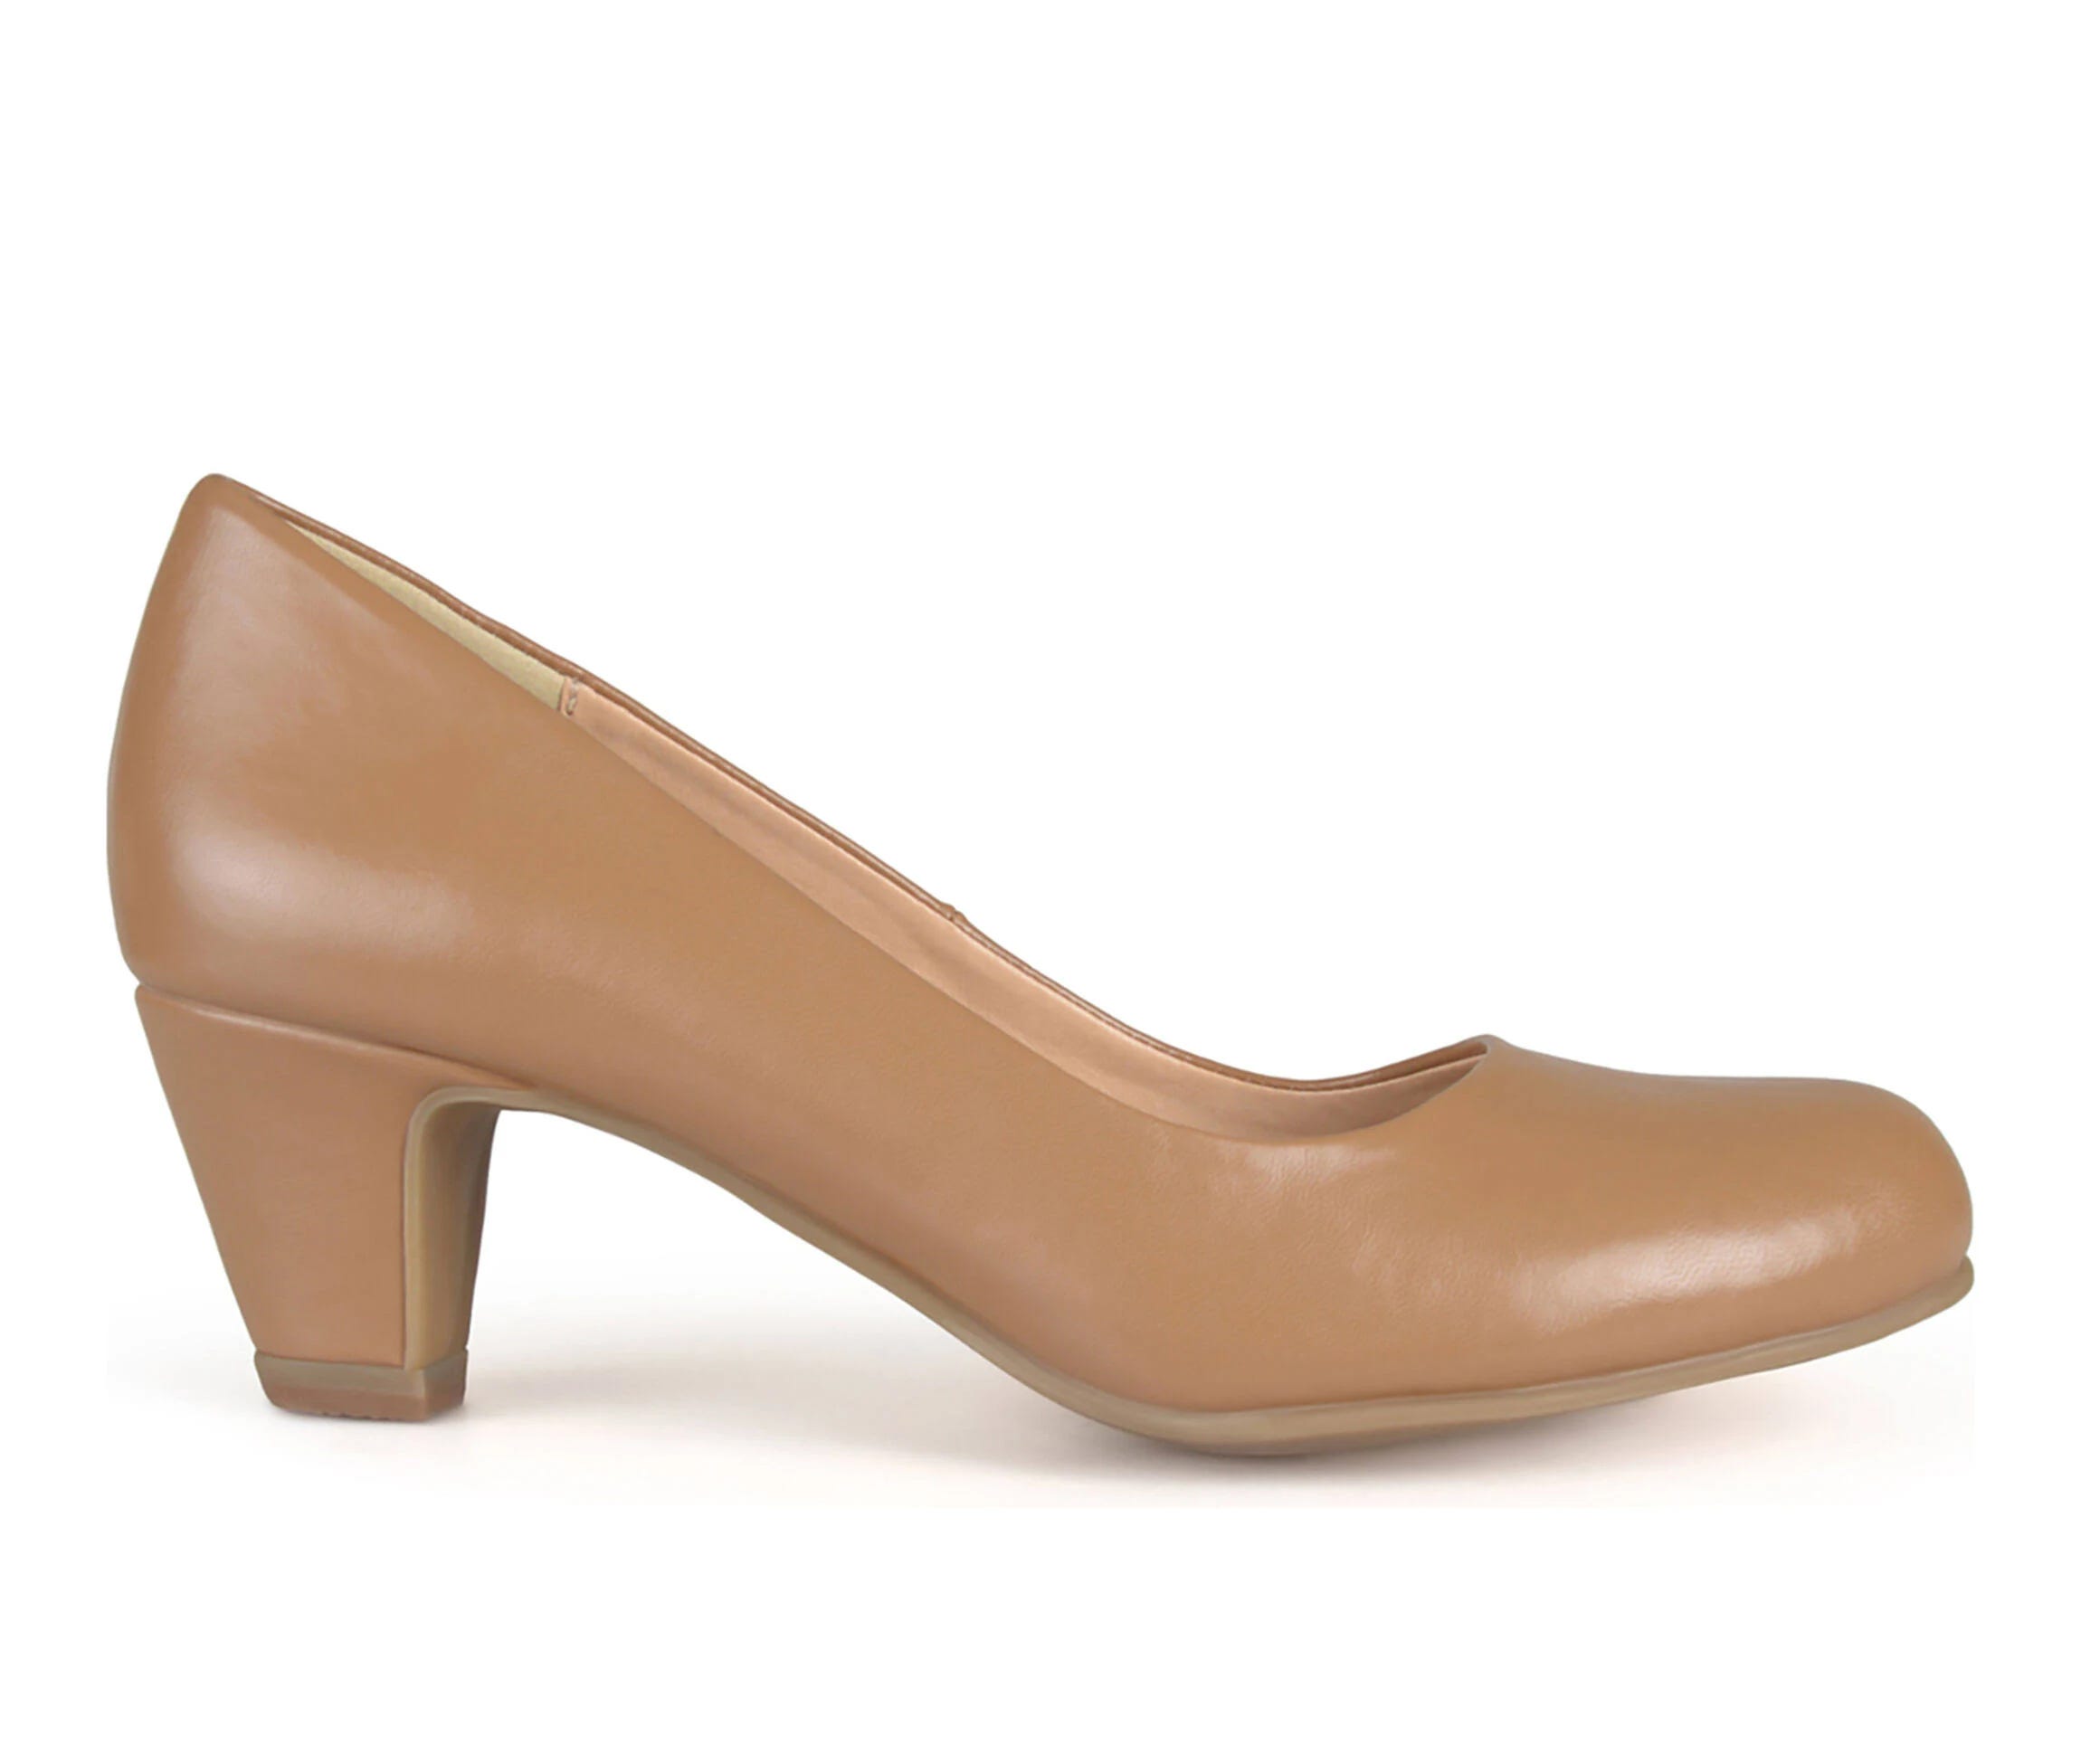 Versatile Journee Collection Wide Width Pump for Comfort and Fashion | Image